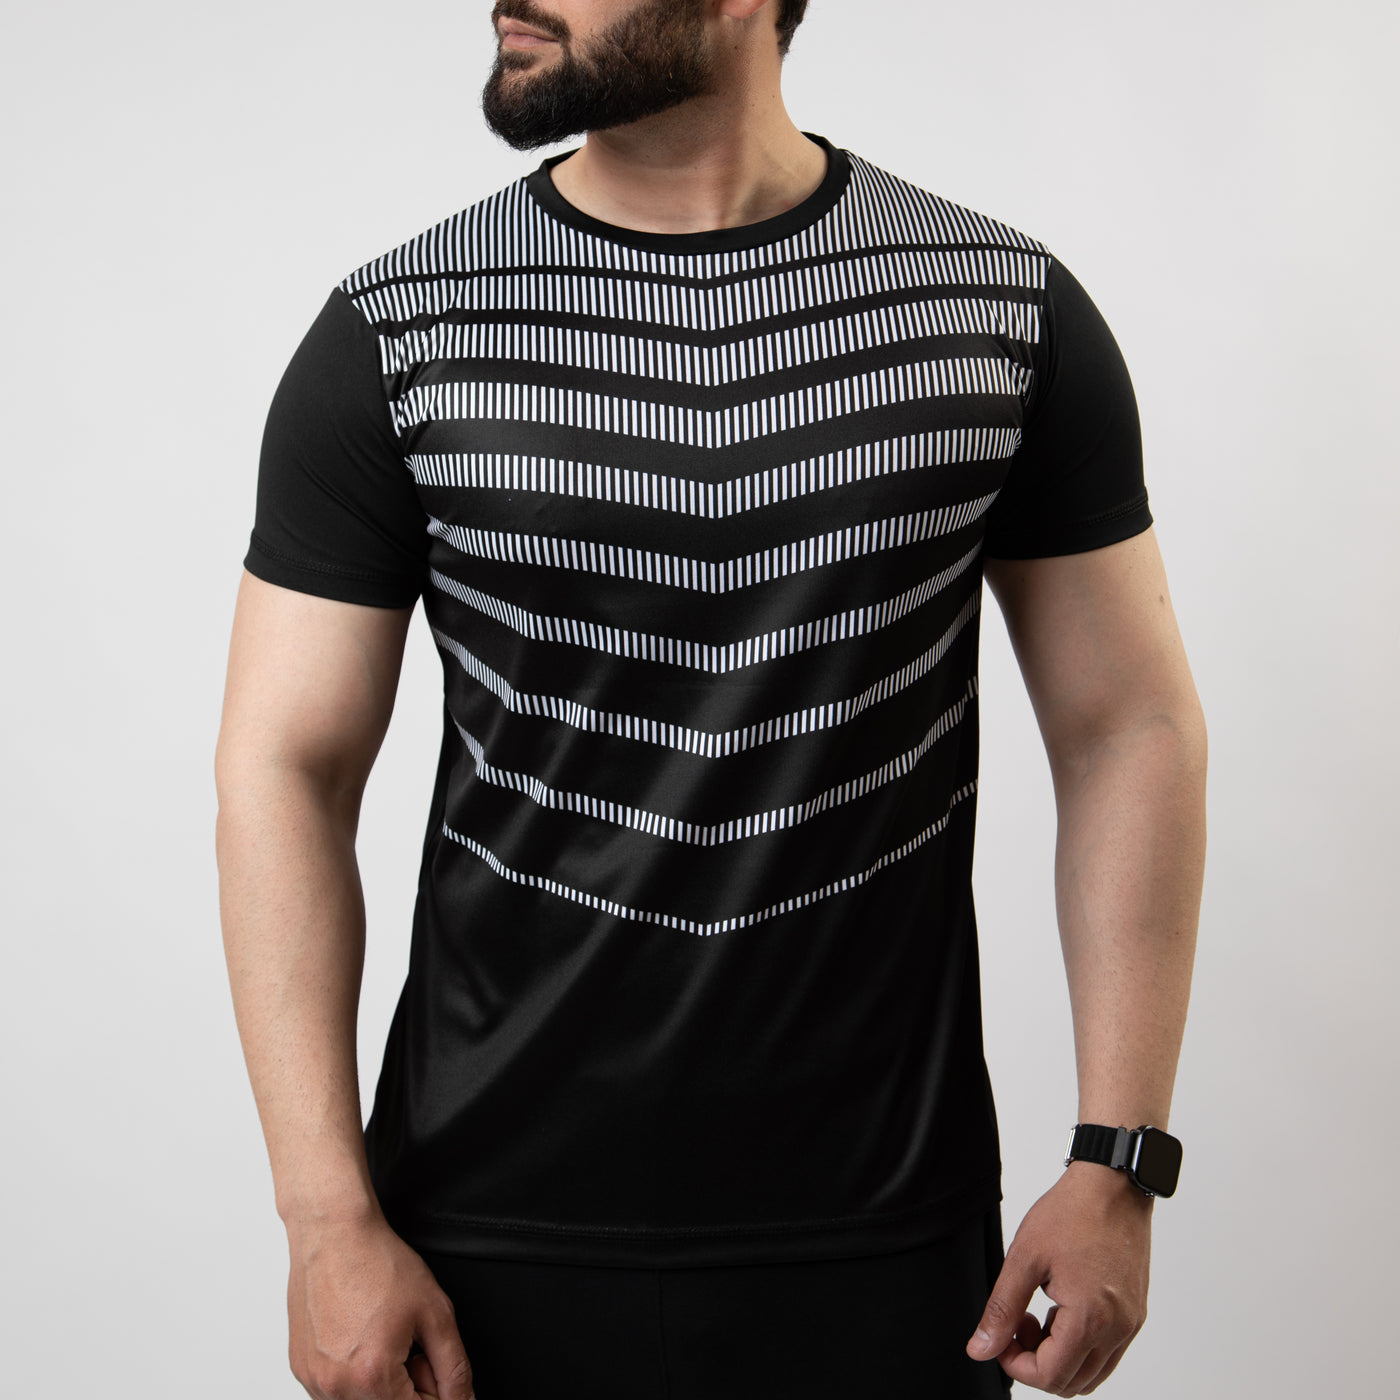 Black Sublimated Quick Dry T-Shirt with White Armor Stripes